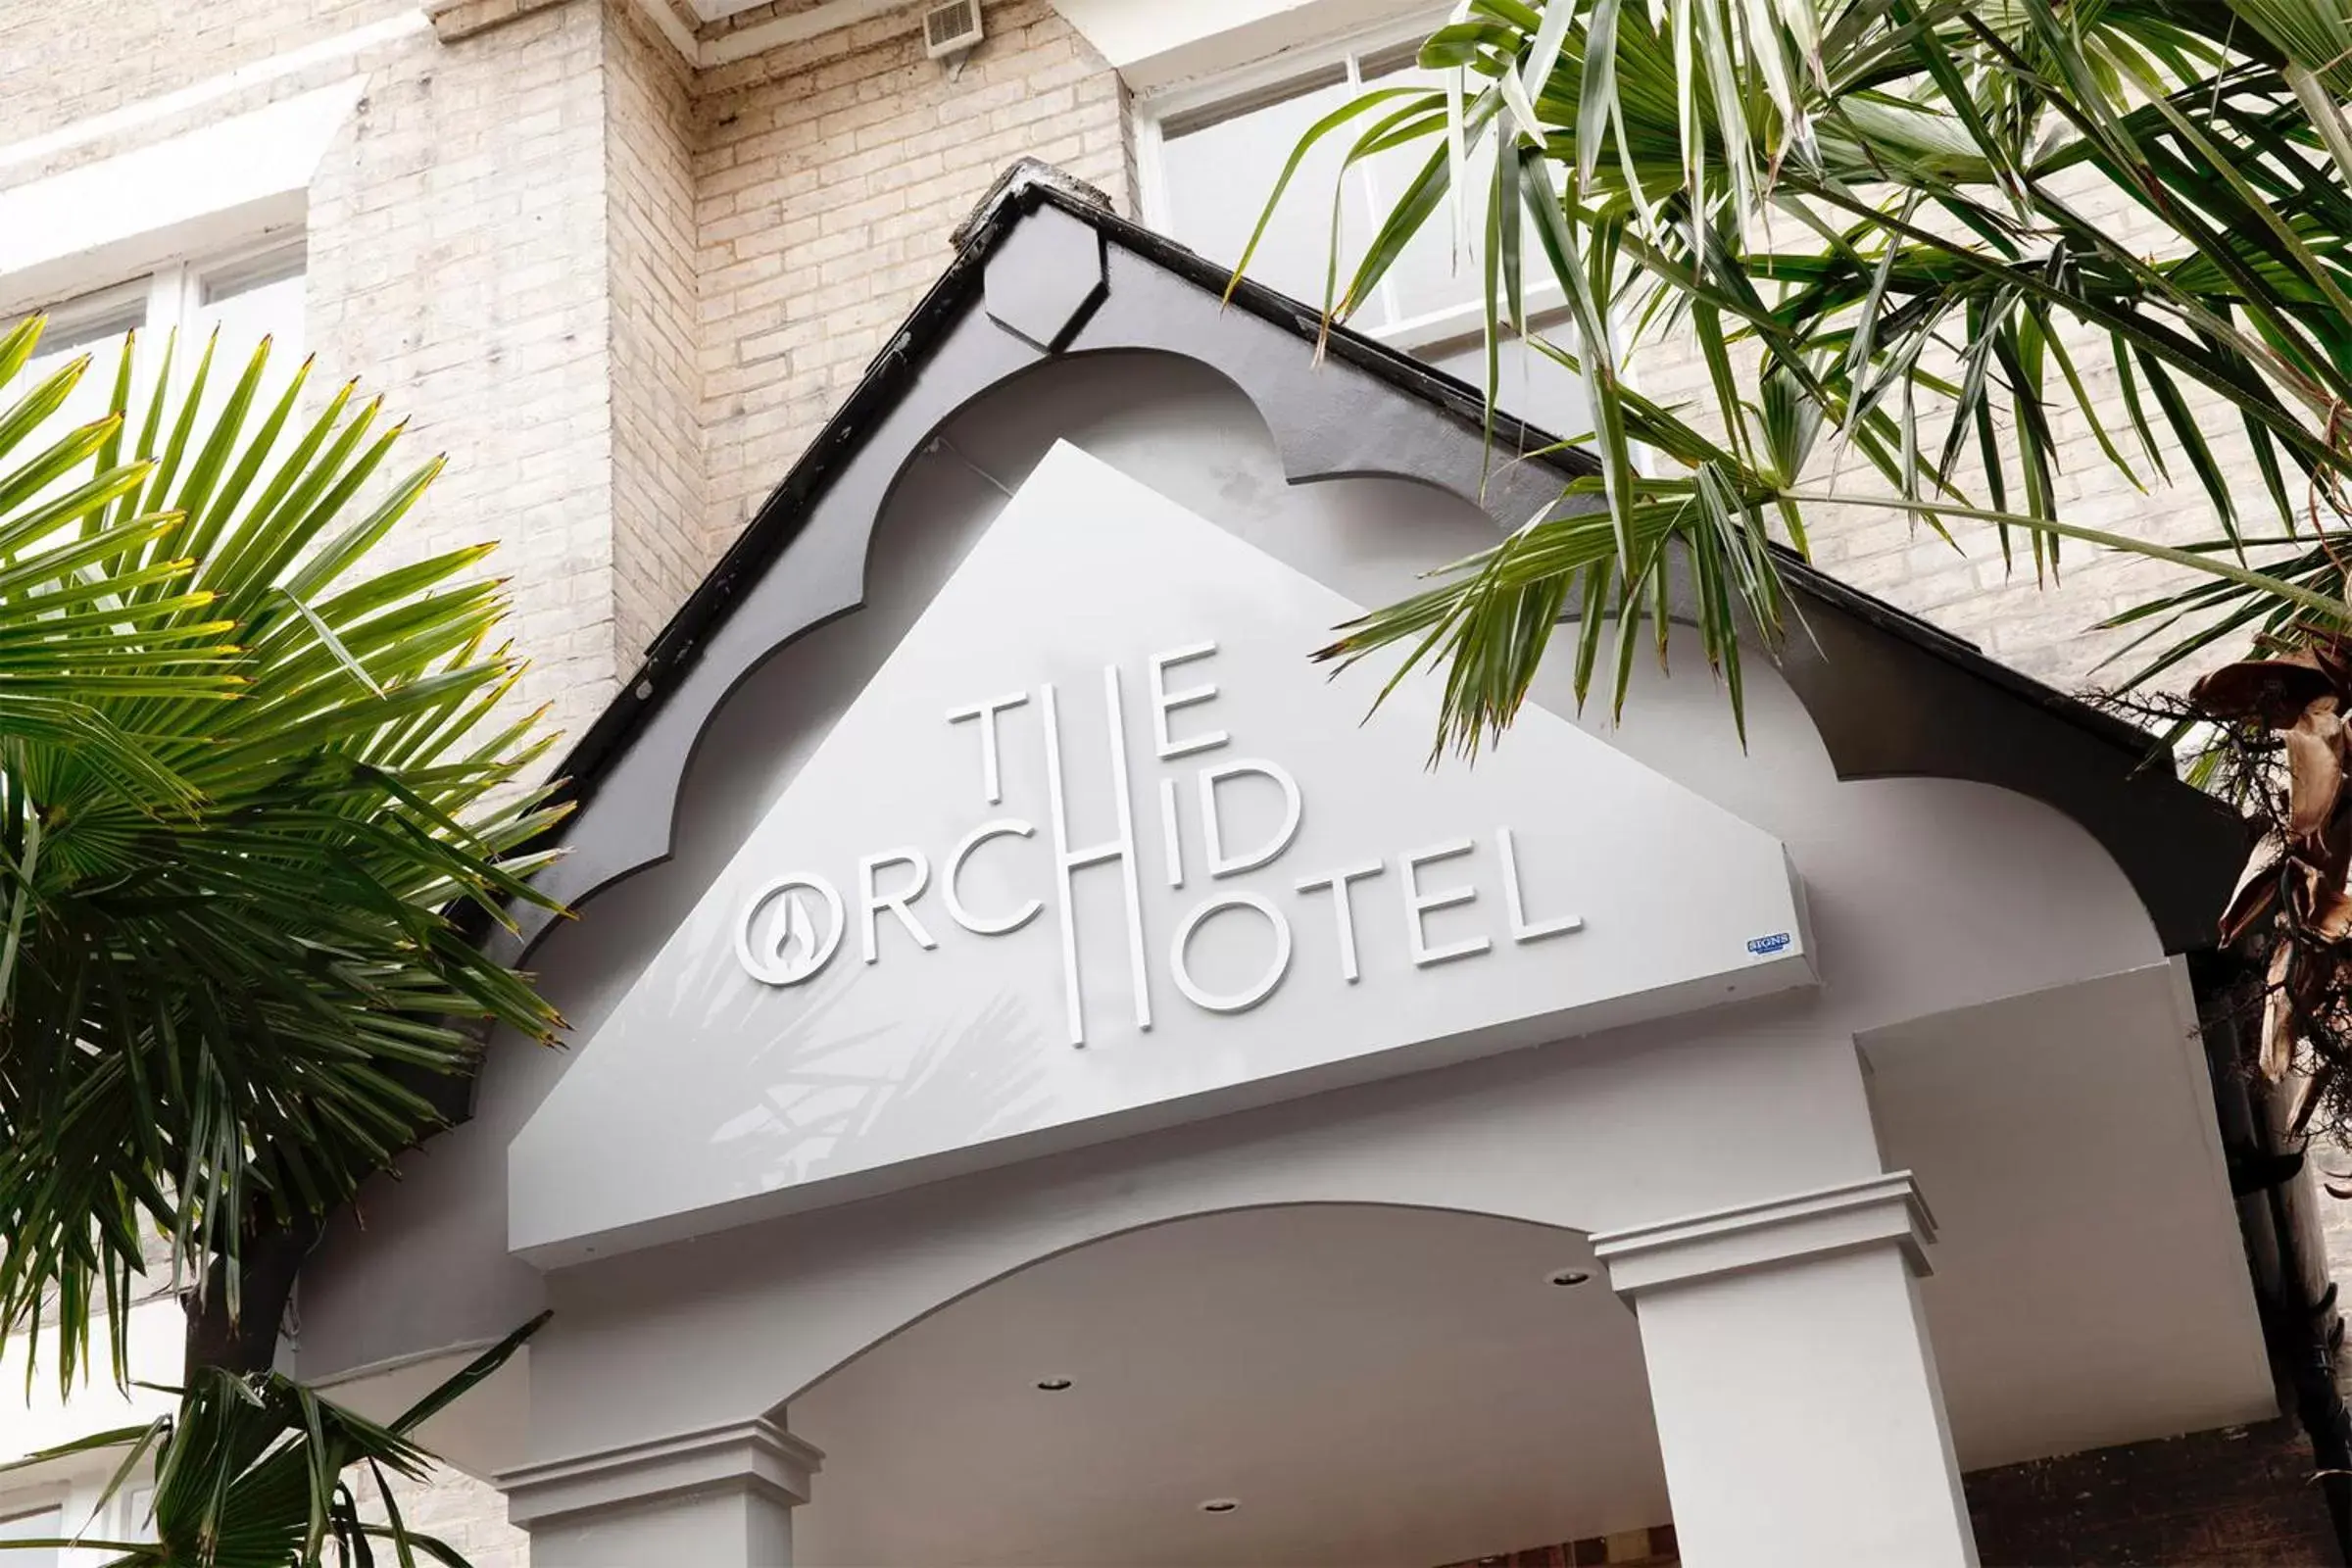 Facade/entrance in The Orchid Hotel